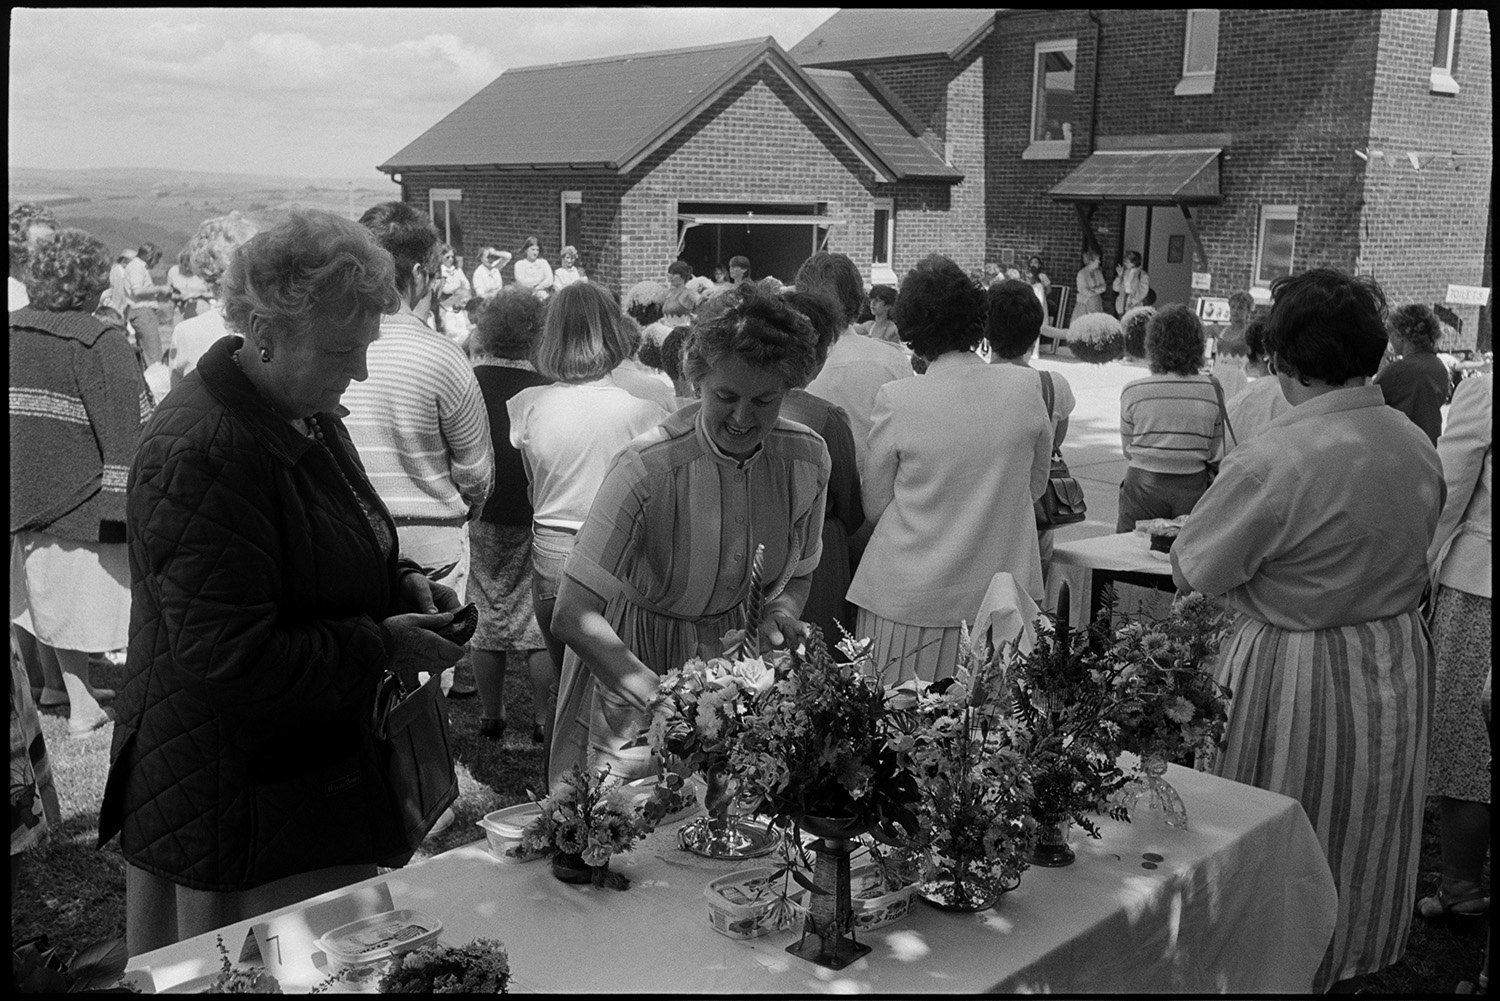 Stalls at fete, skittle alley cakes, raffle stall, pony ride. <br />
[Women looking at flower displays on a stall at High Bickington church fete held at the vicarage. People are gathered around watching majorettes performing in the background.]